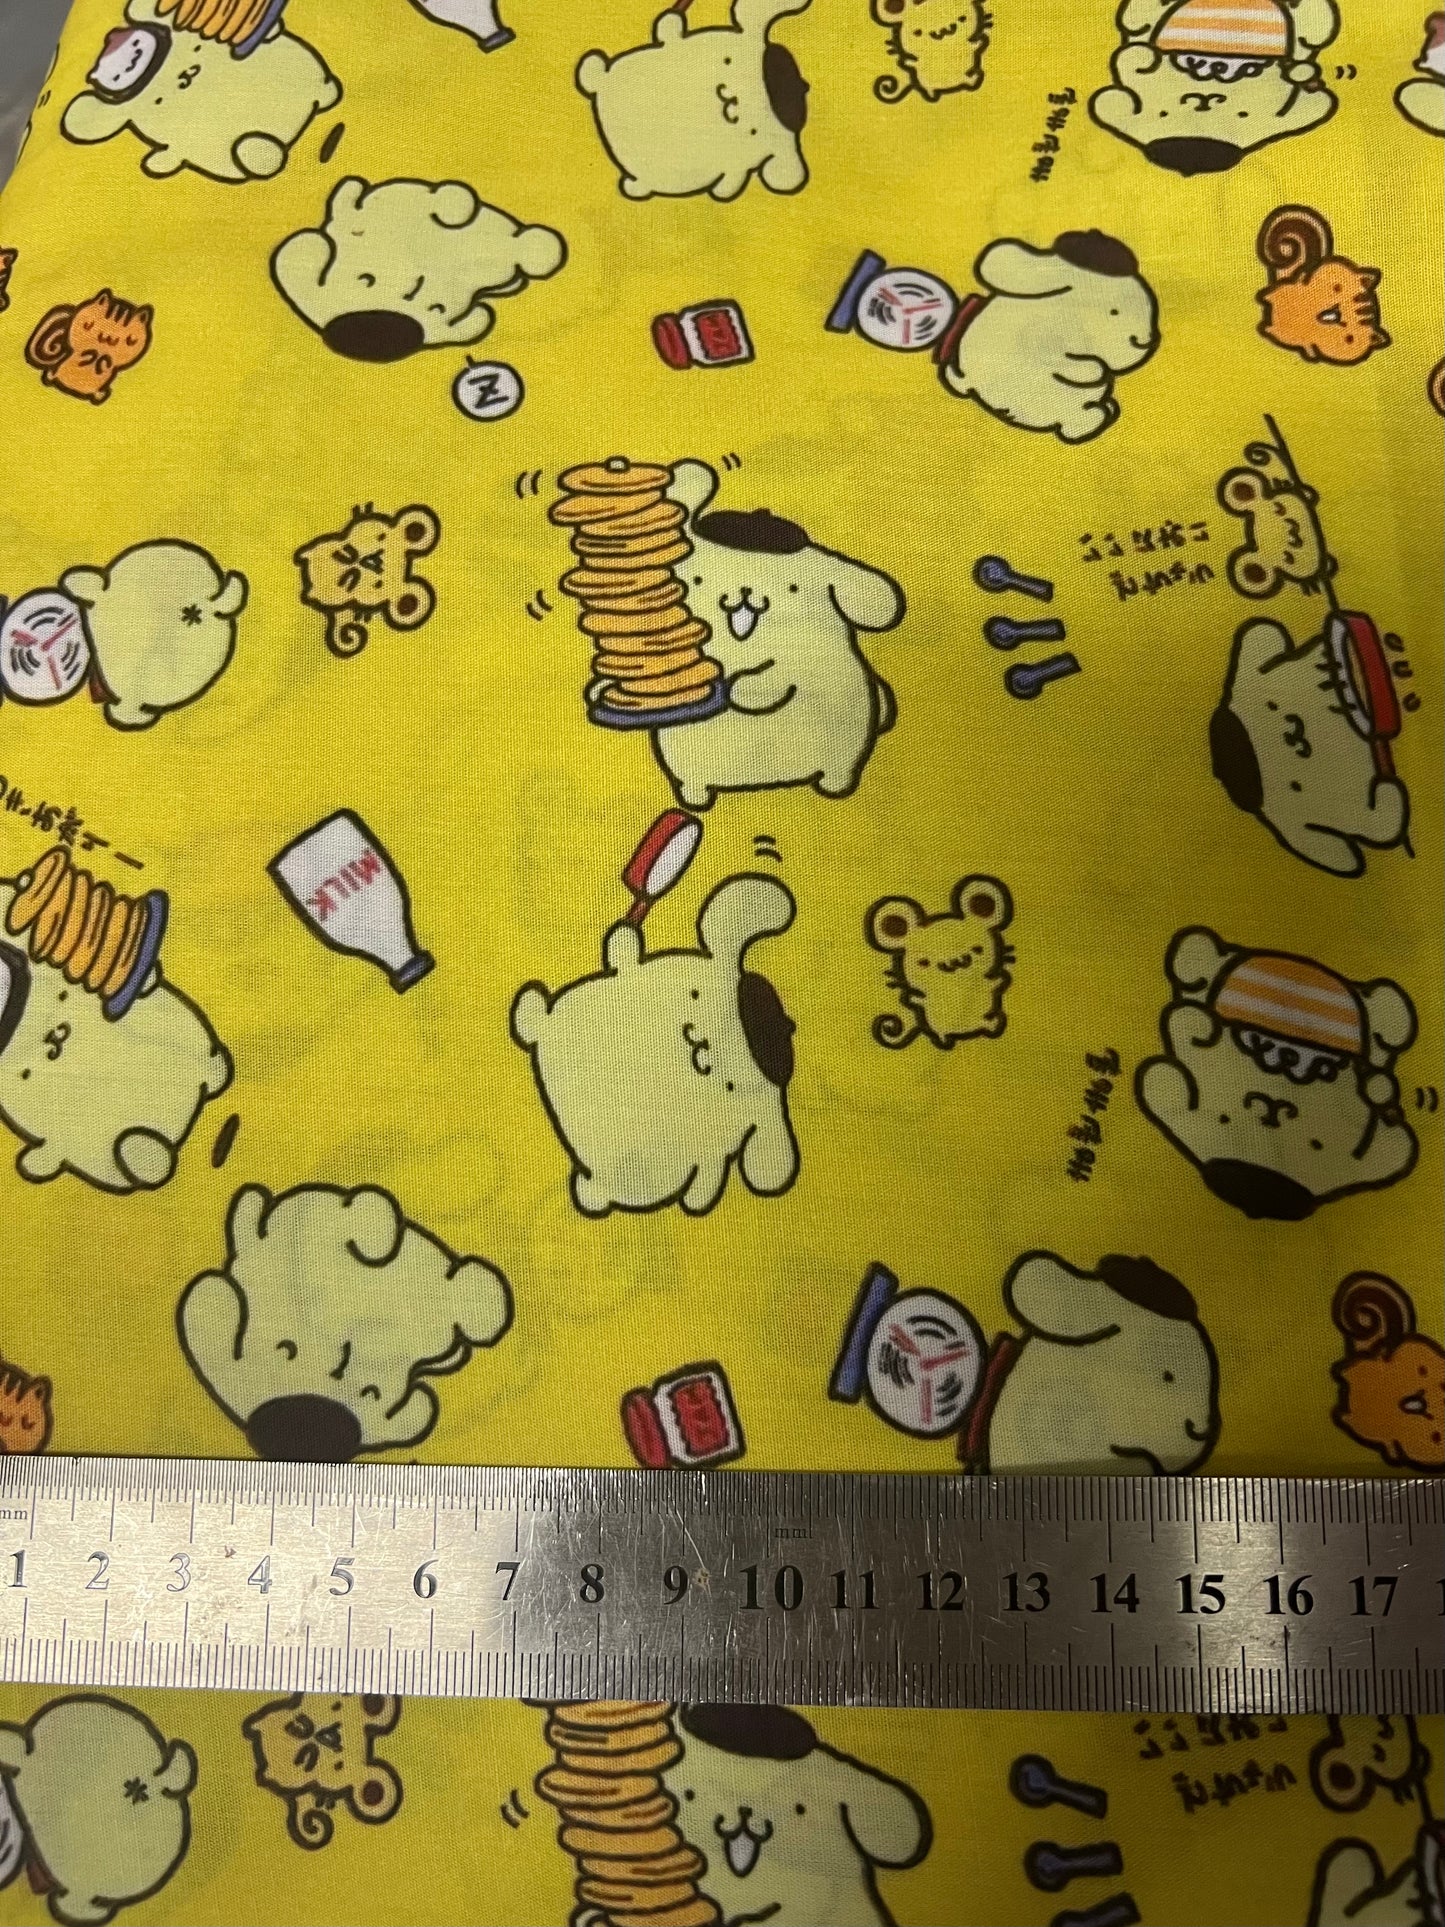 POMPOMPURIN PANCAKES  - Polycotton Fabric from Japan